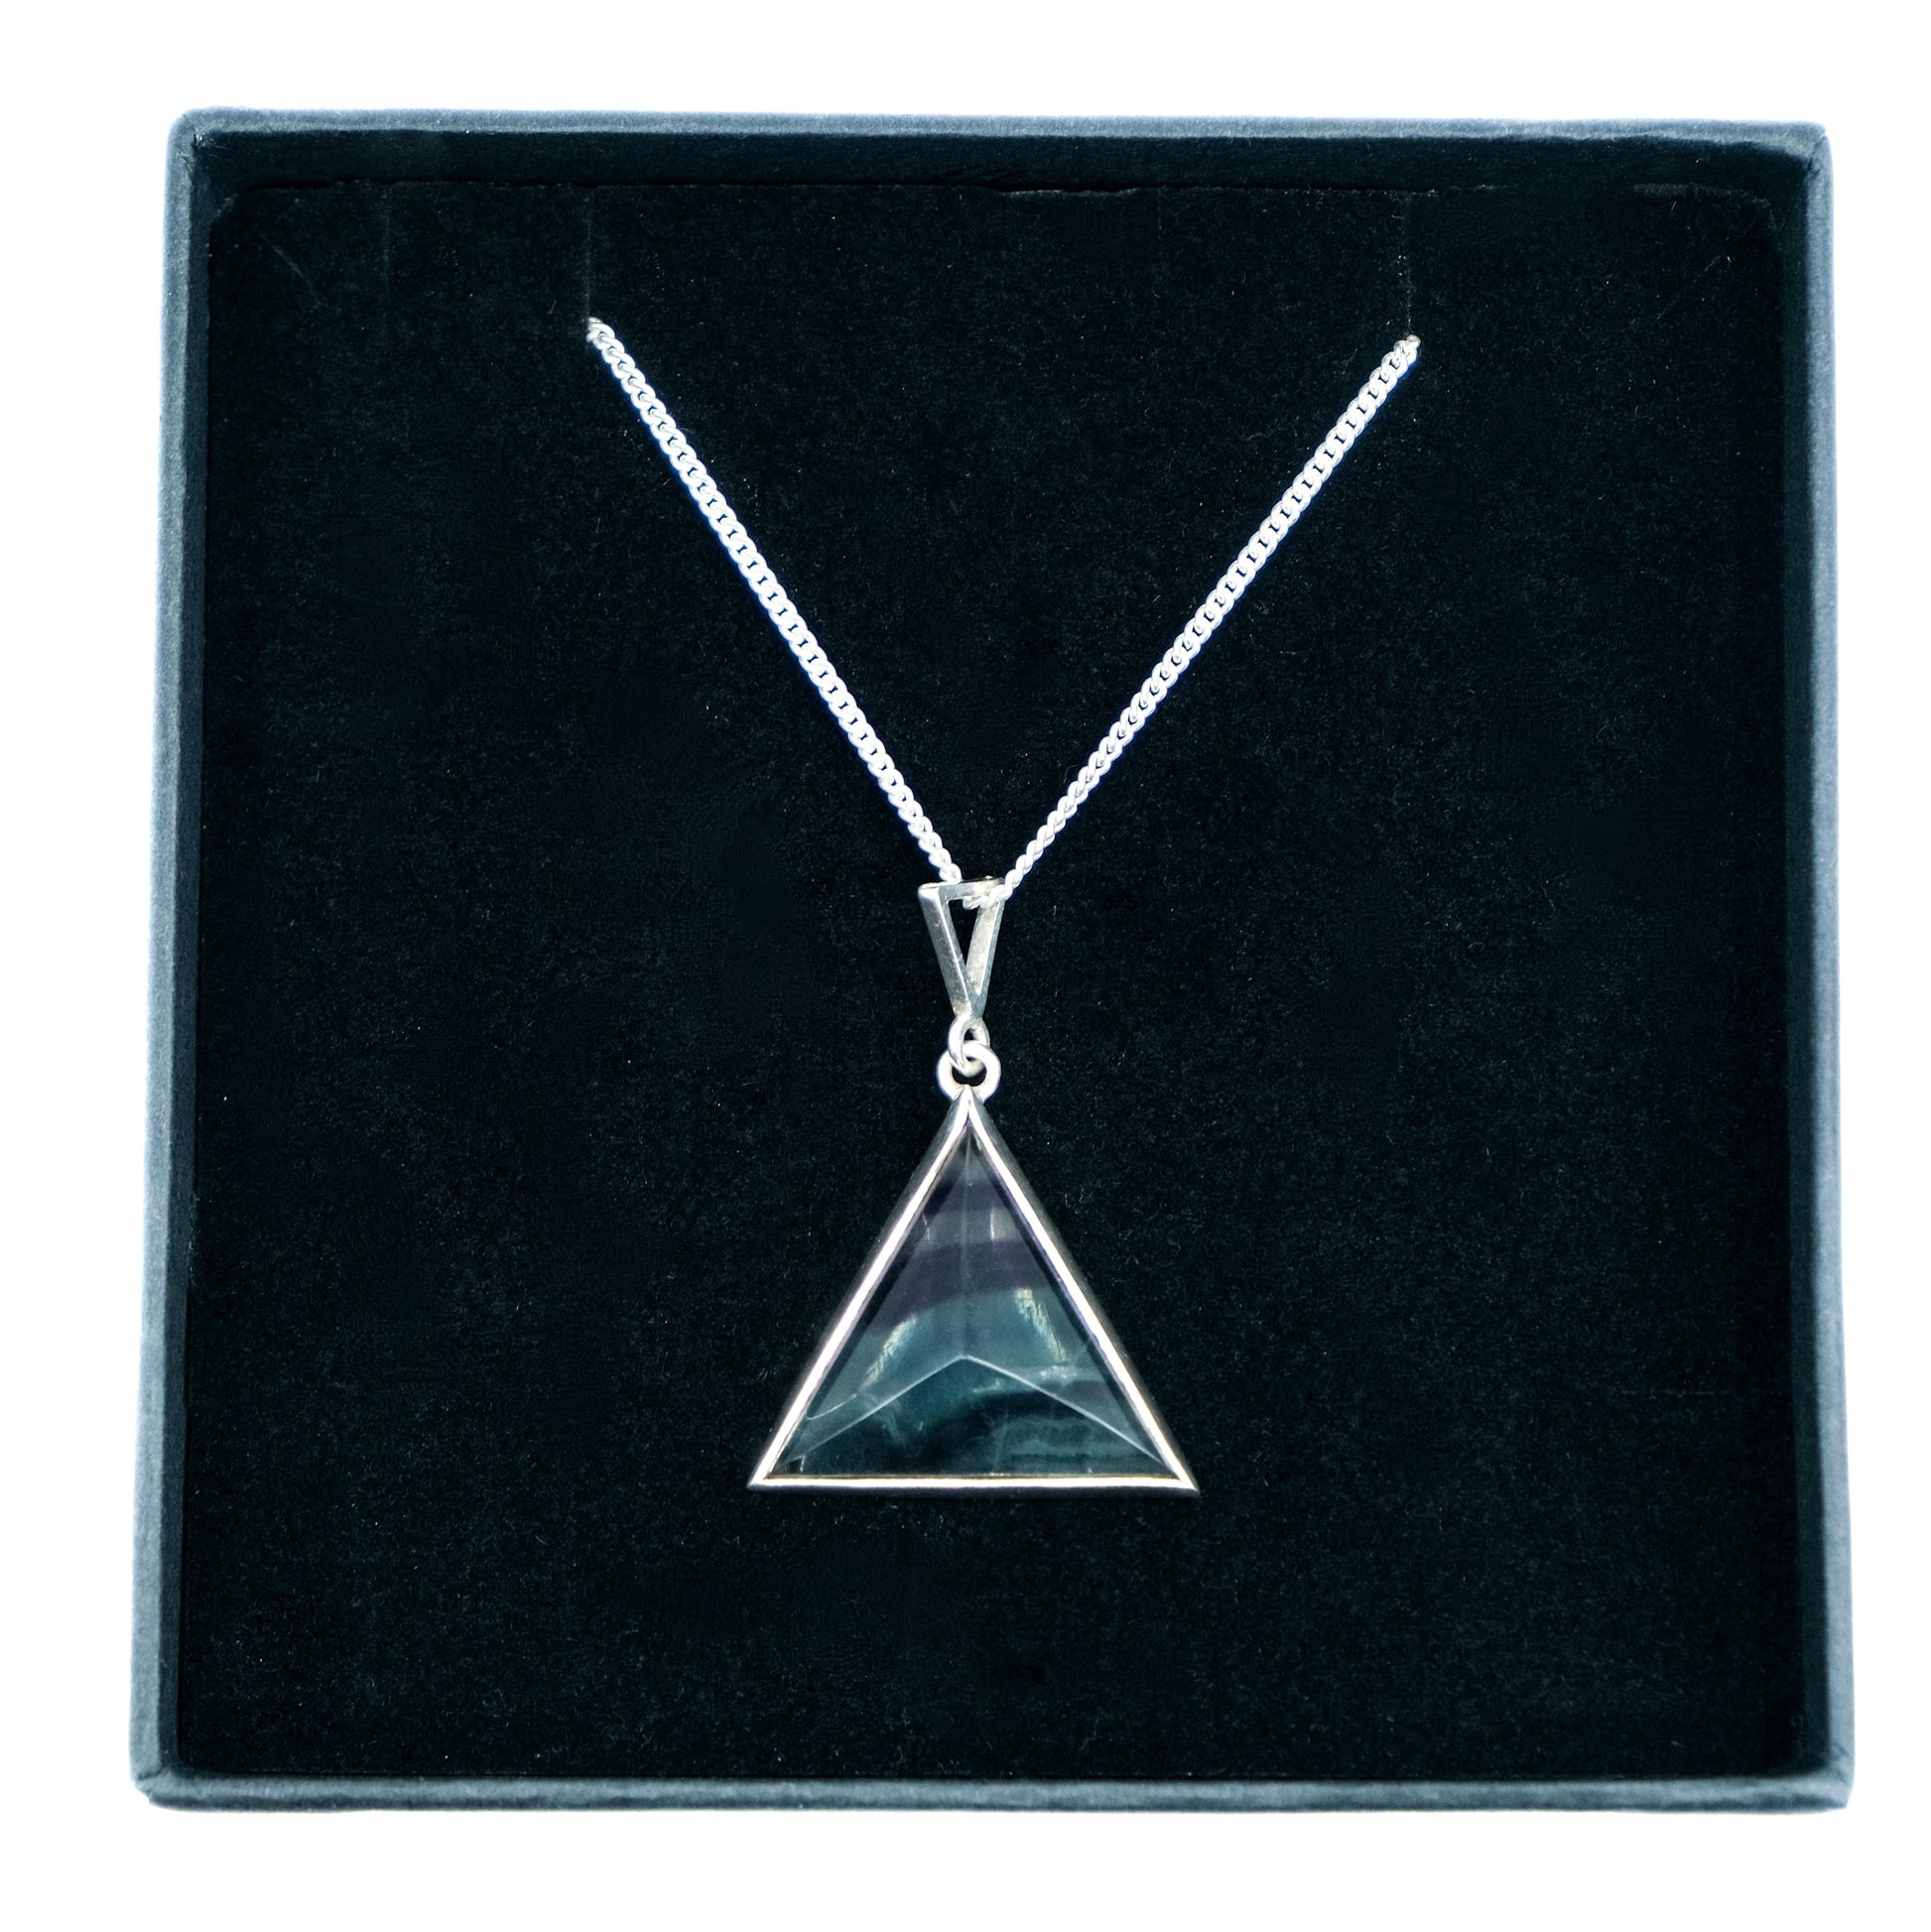 A Rainbow Fluorite triangle pendant necklace with 925 silver surround in a jewellery box